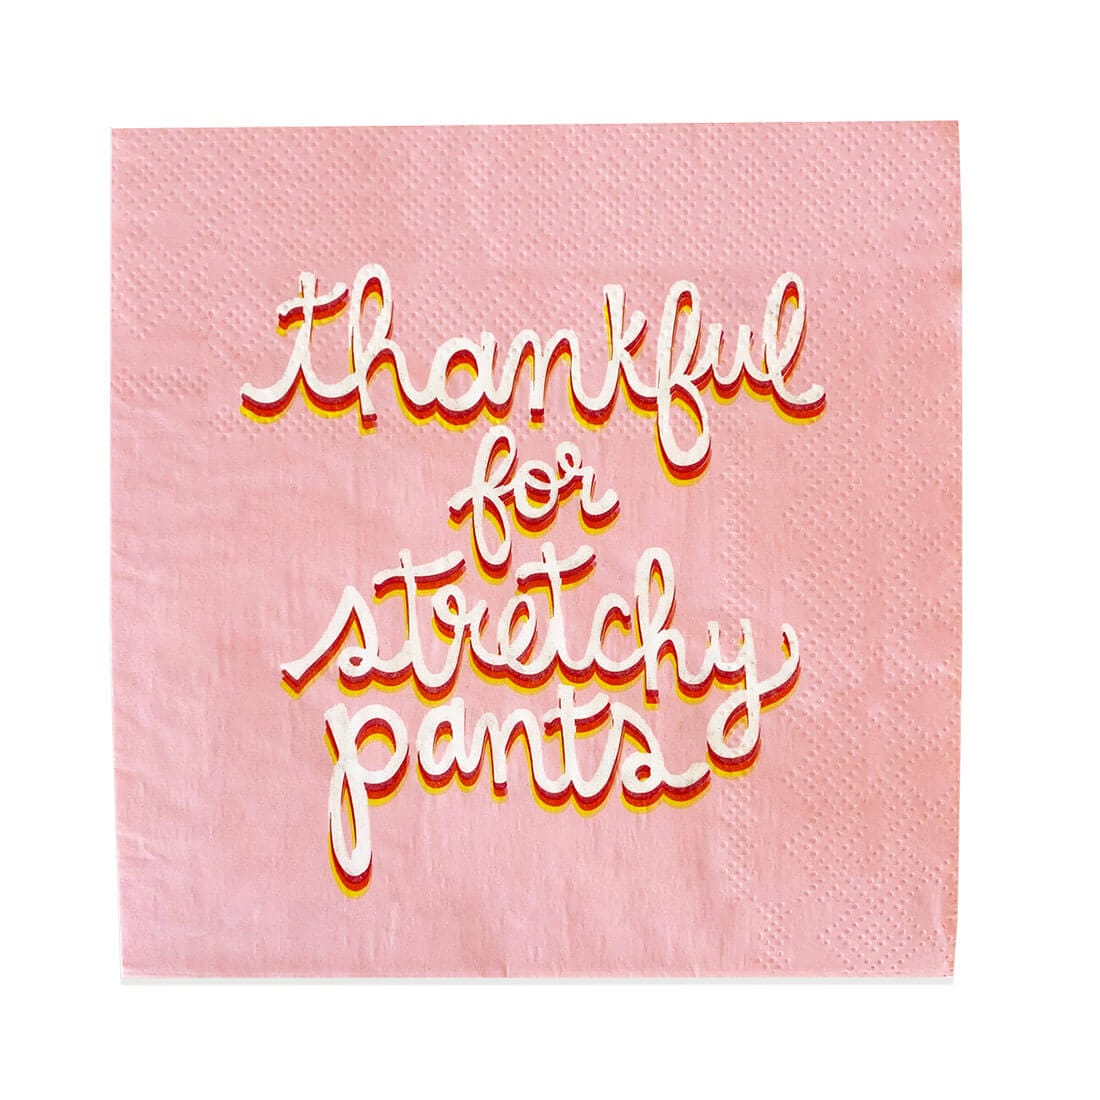 Pink napkins with orange and white text reading “Thankful for stretchy pants” available in the Just Peachy shop.